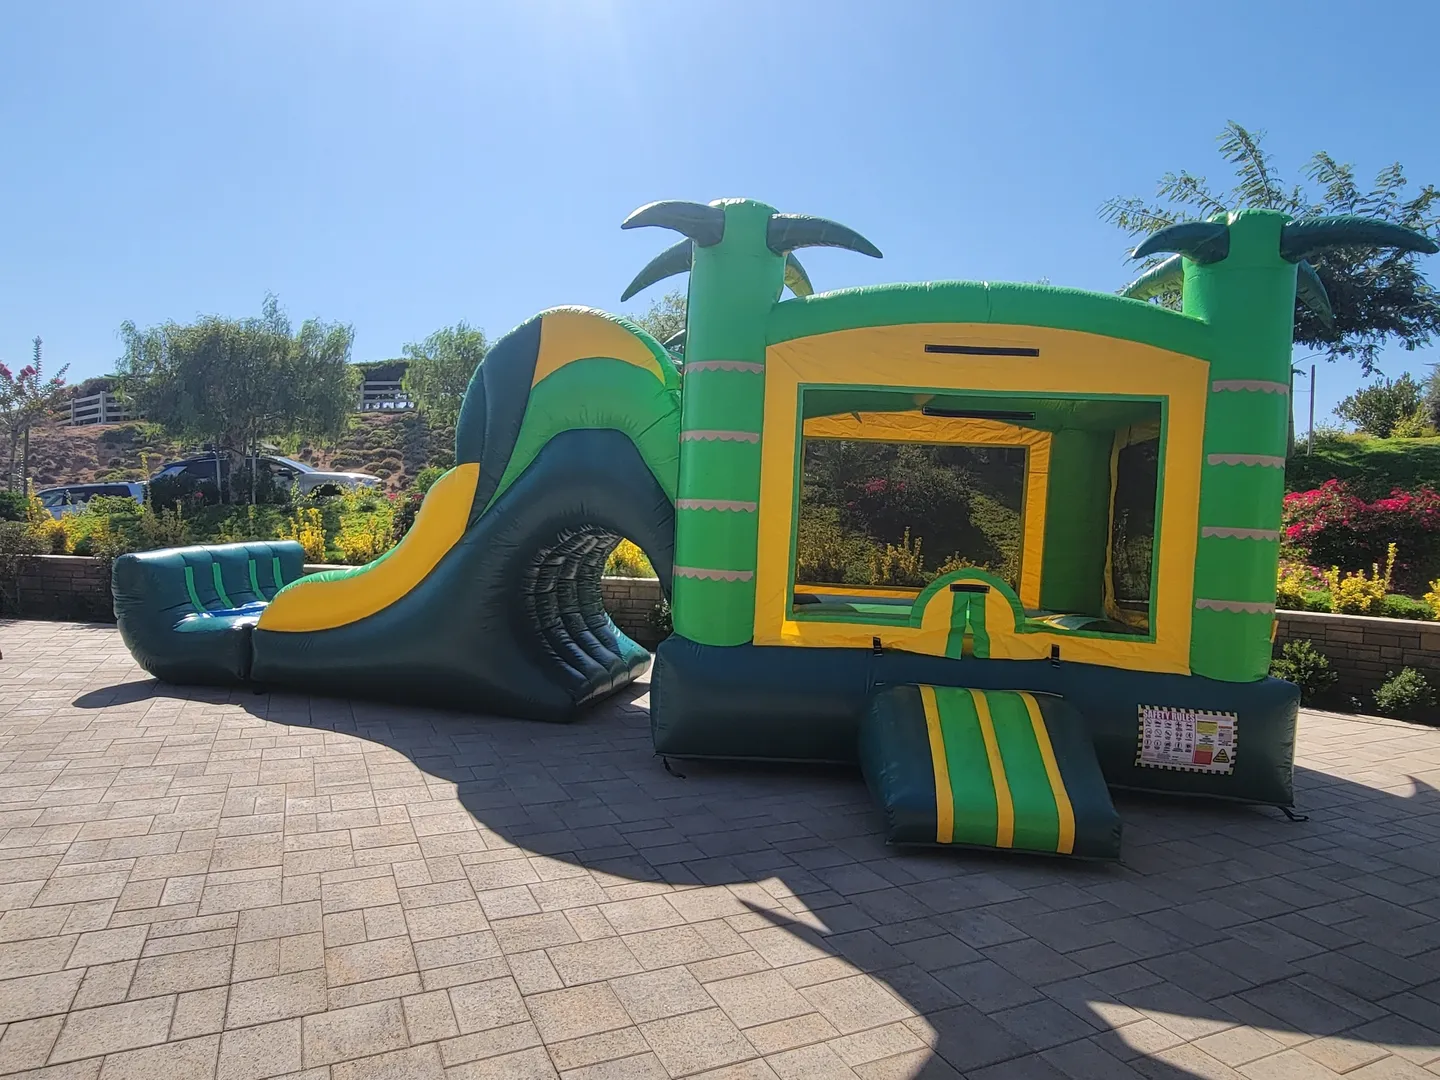 A green and yellow inflatable slide with palm trees.